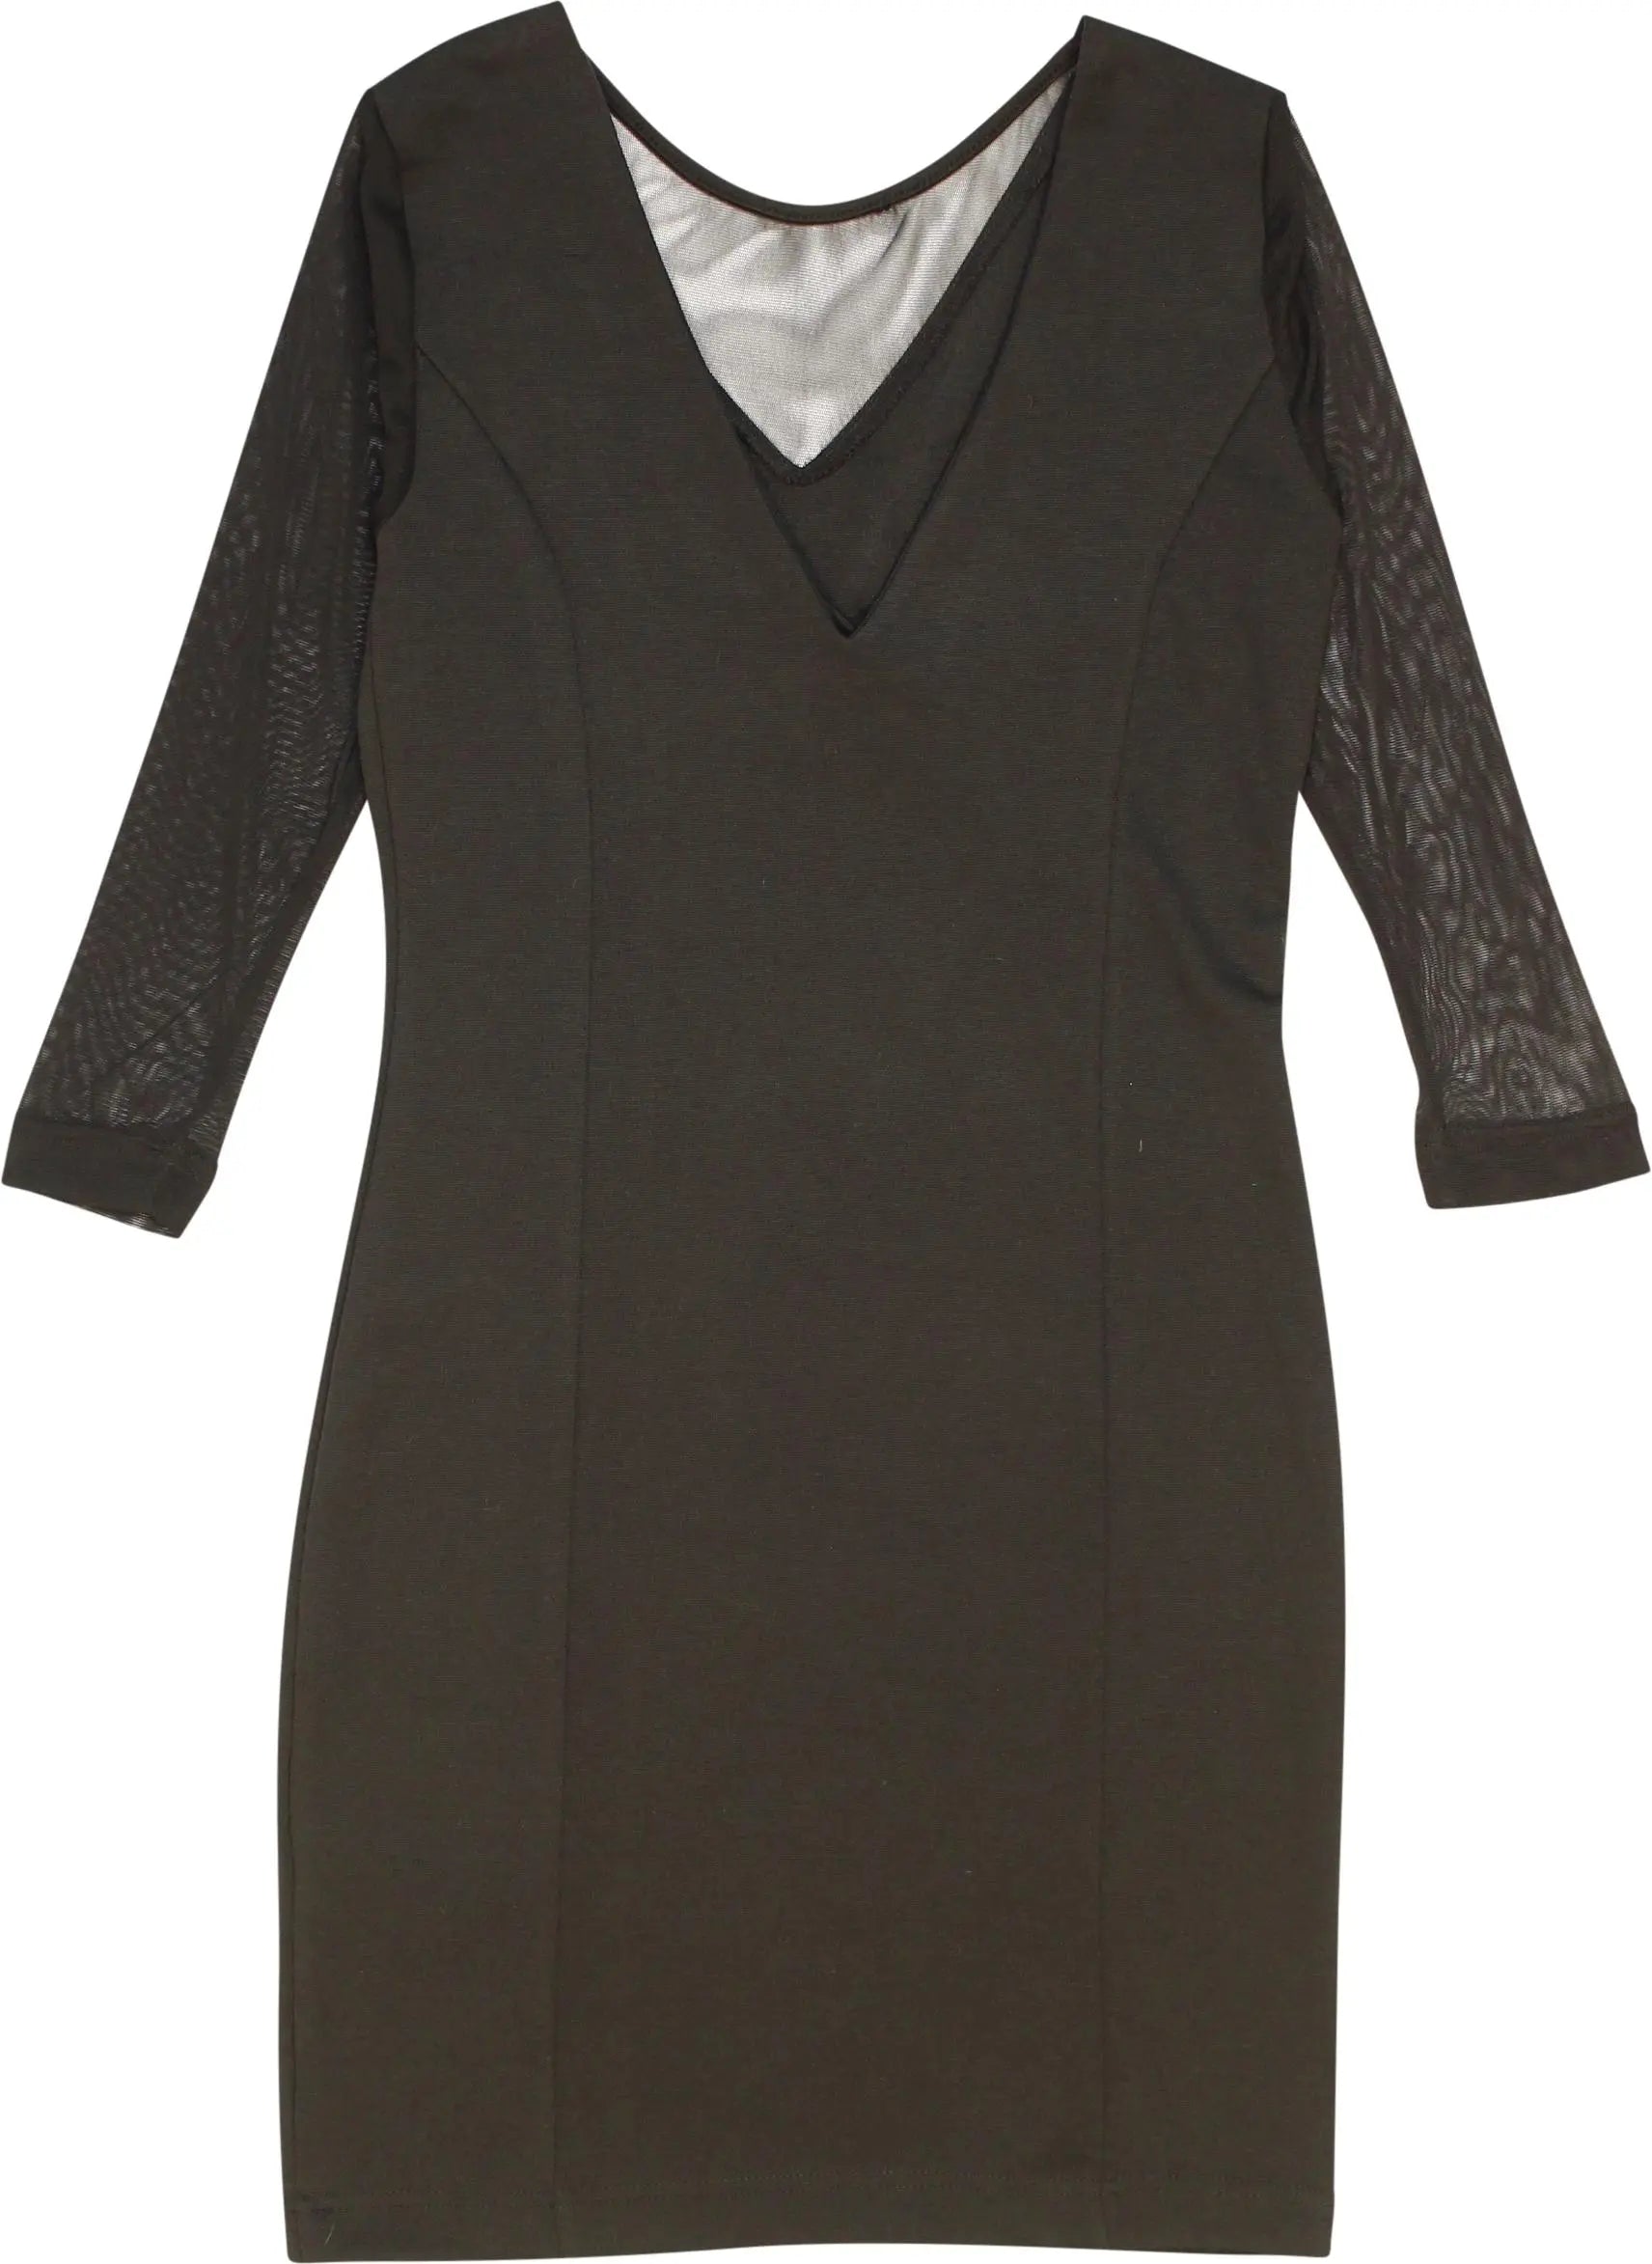 Vero Moda - Black Dress with Mesh- ThriftTale.com - Vintage and second handclothing